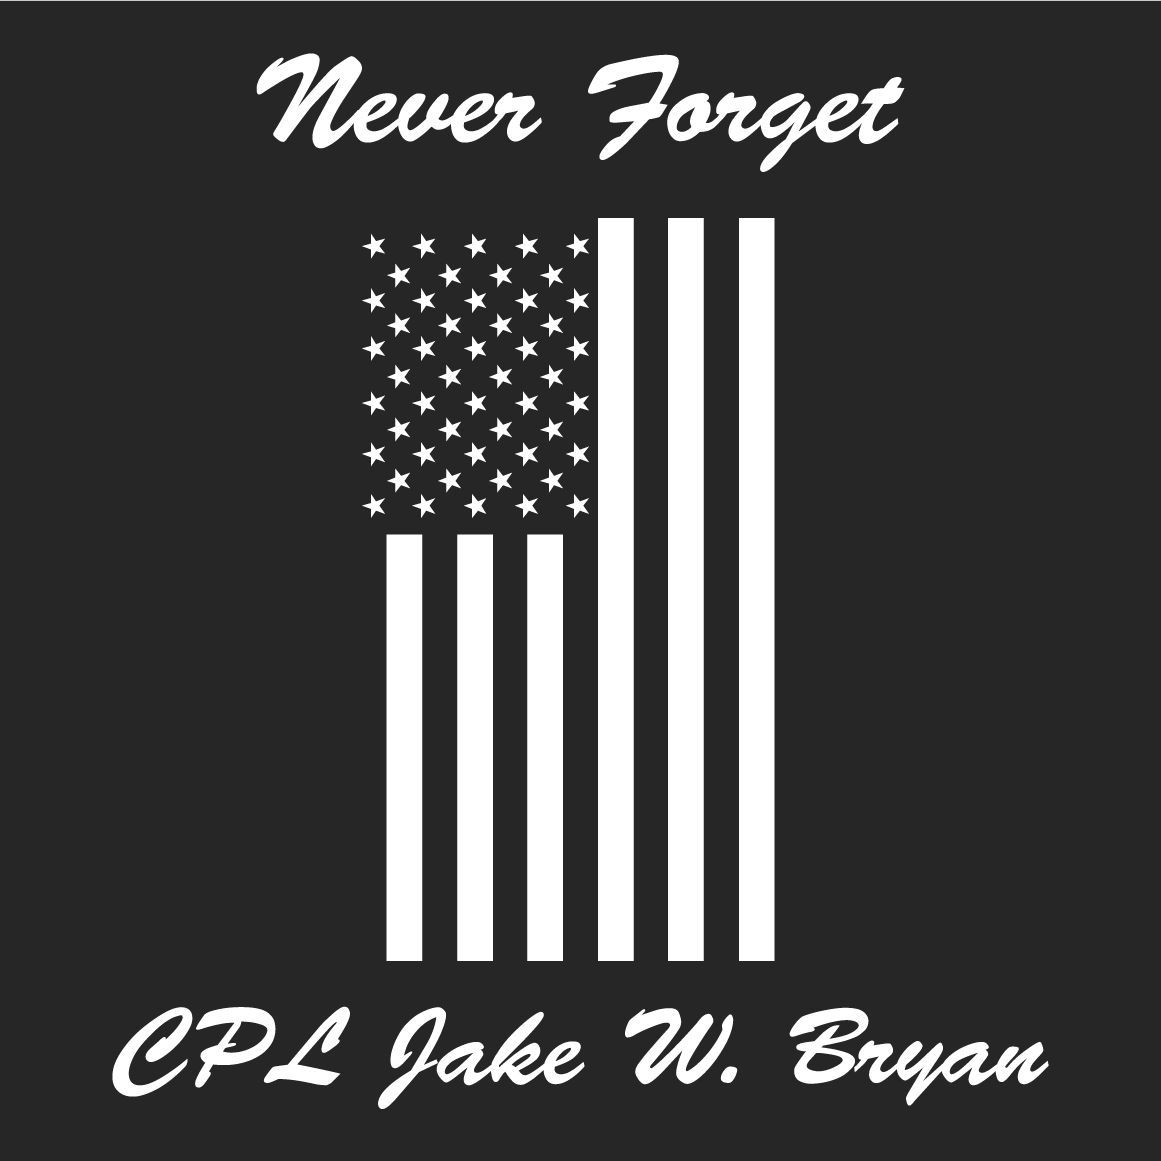 For CPL Jake W. Bryan shirt design - zoomed